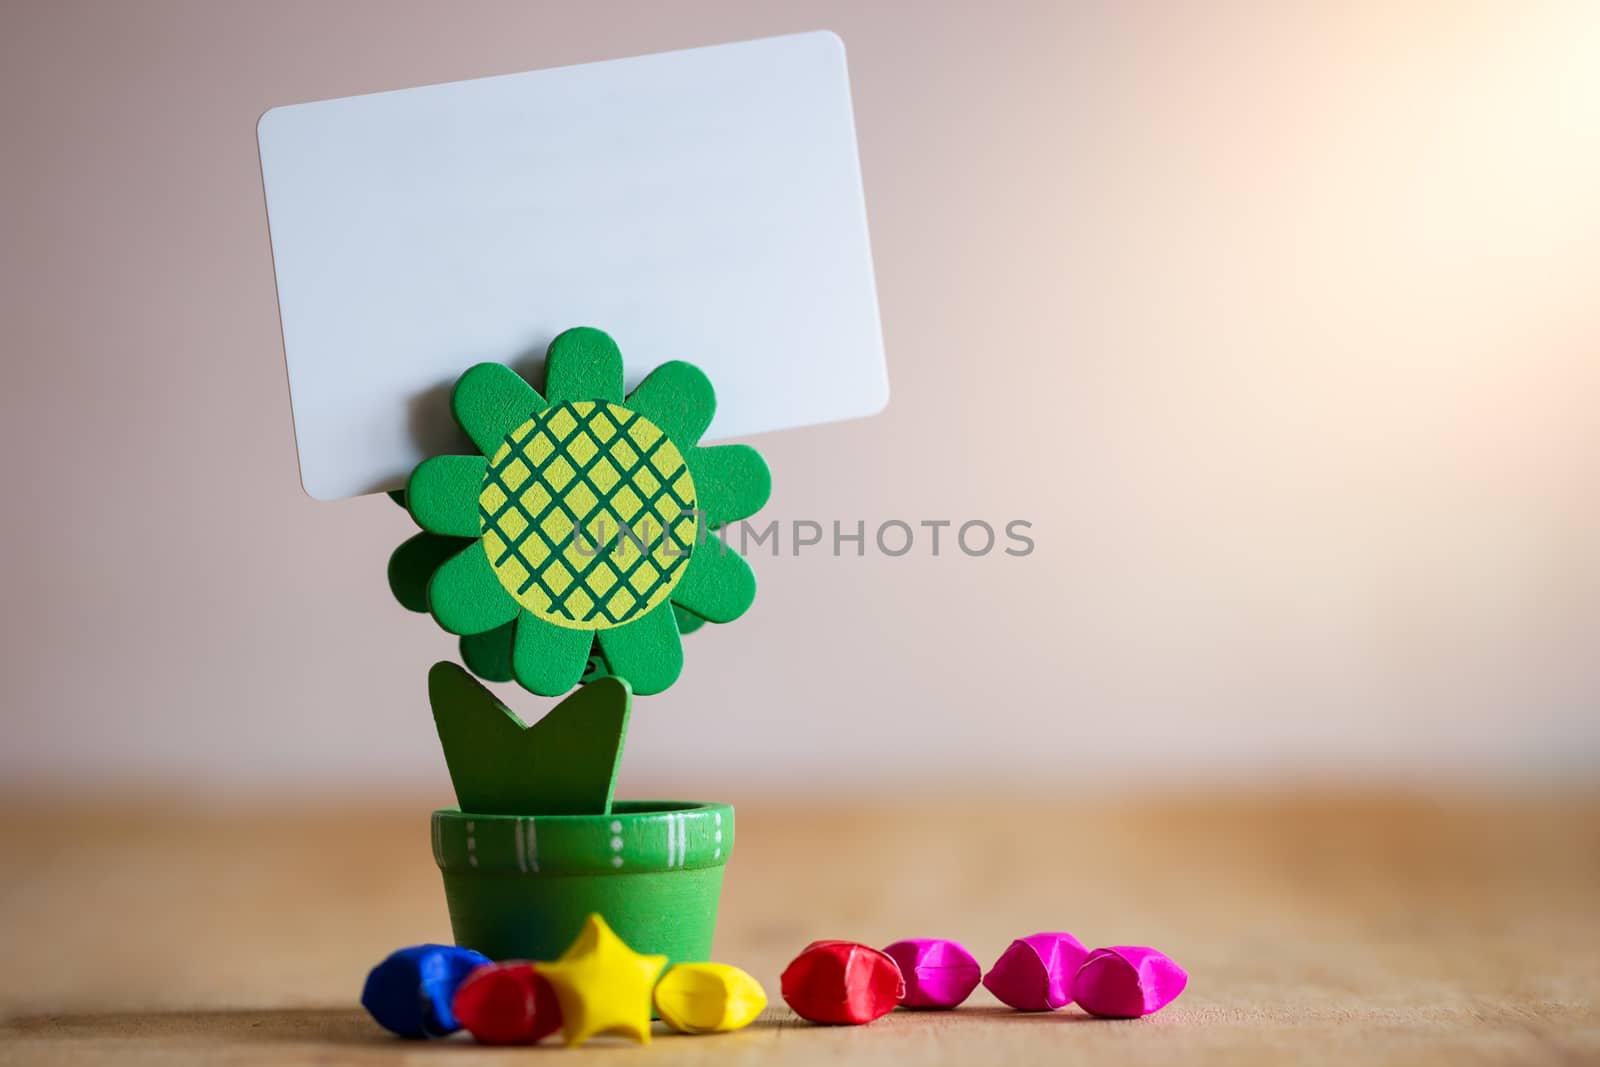 Clip holder card stand green sunflower shaped and multicolored p by SaitanSainam